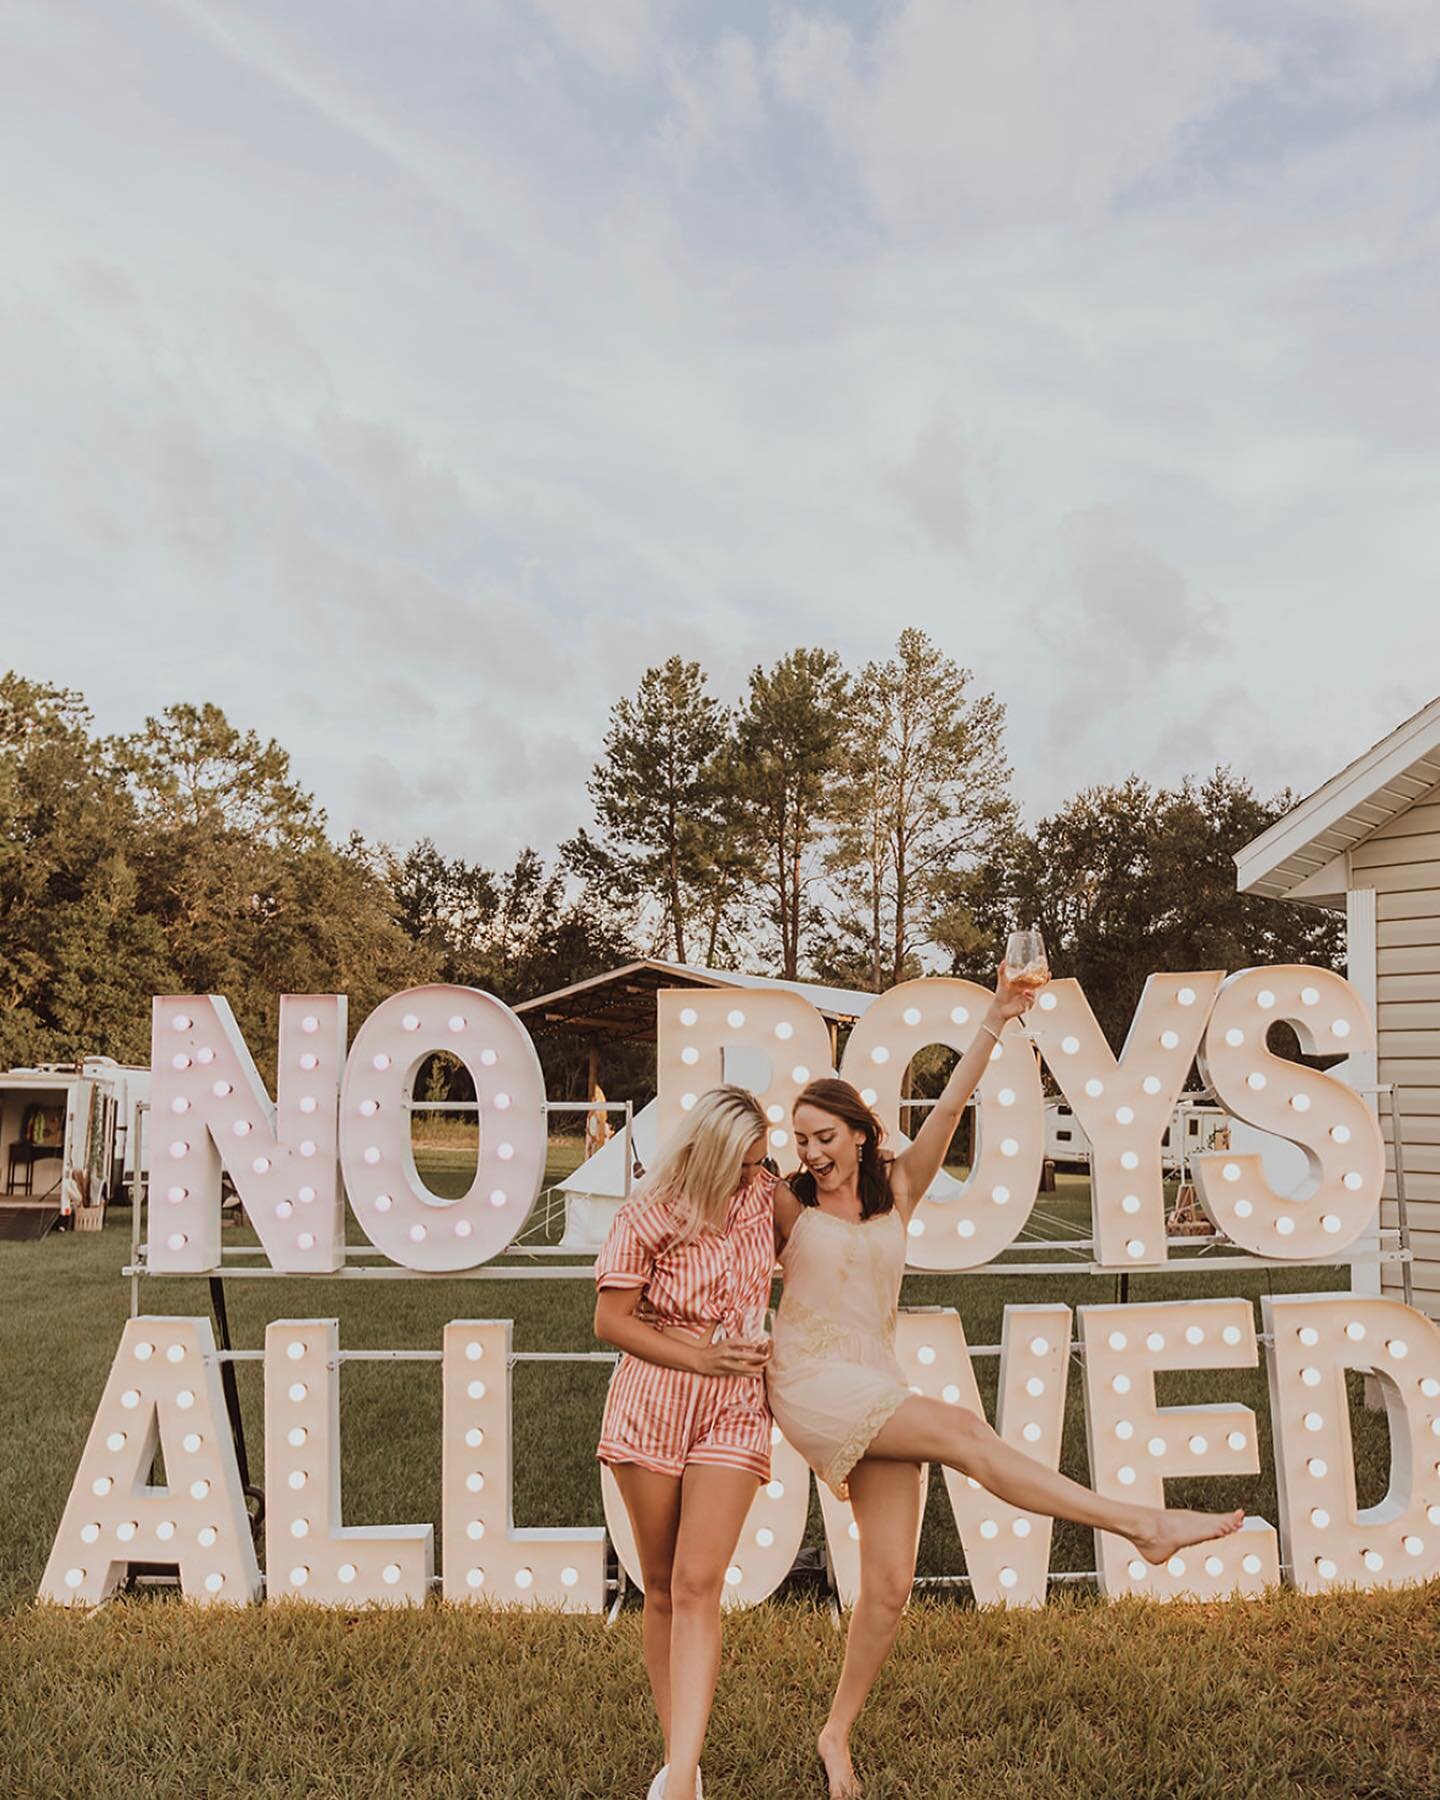 NO BOYS ALLOWED! A rule we can get behind💕 An honor planning alongside @sagecoterie and @kelcileighevents for this epic Girls Night Out! 

Photographer: @summersimmonsphoto 
Venue/Photo Booth: @primacres 
Marque Letters: @alphalittampastpete 
Bounce